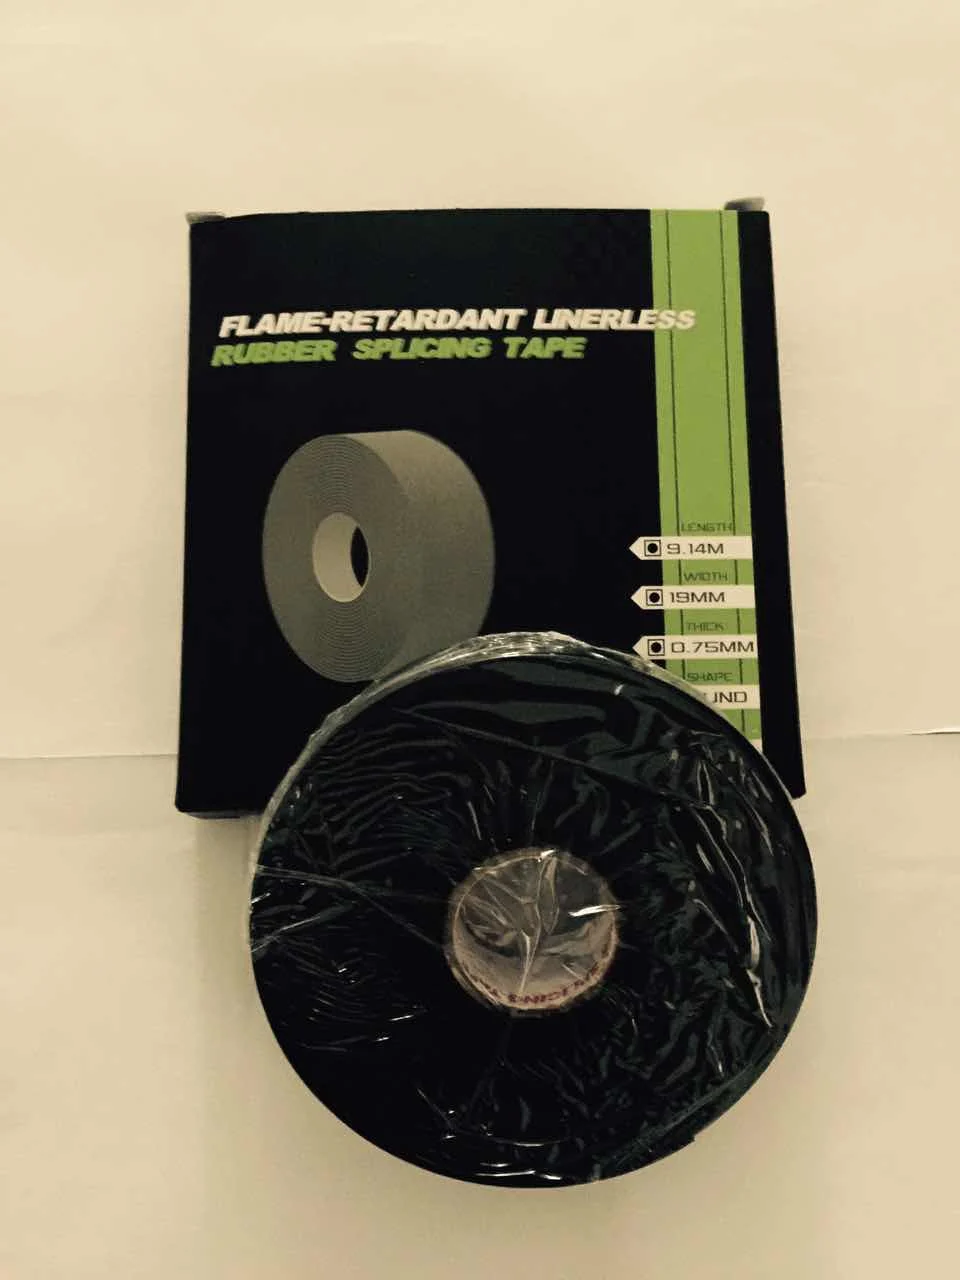 Linerless High Voltage Rubber Splicing Tape (No specks) Self Adhesive Insulation